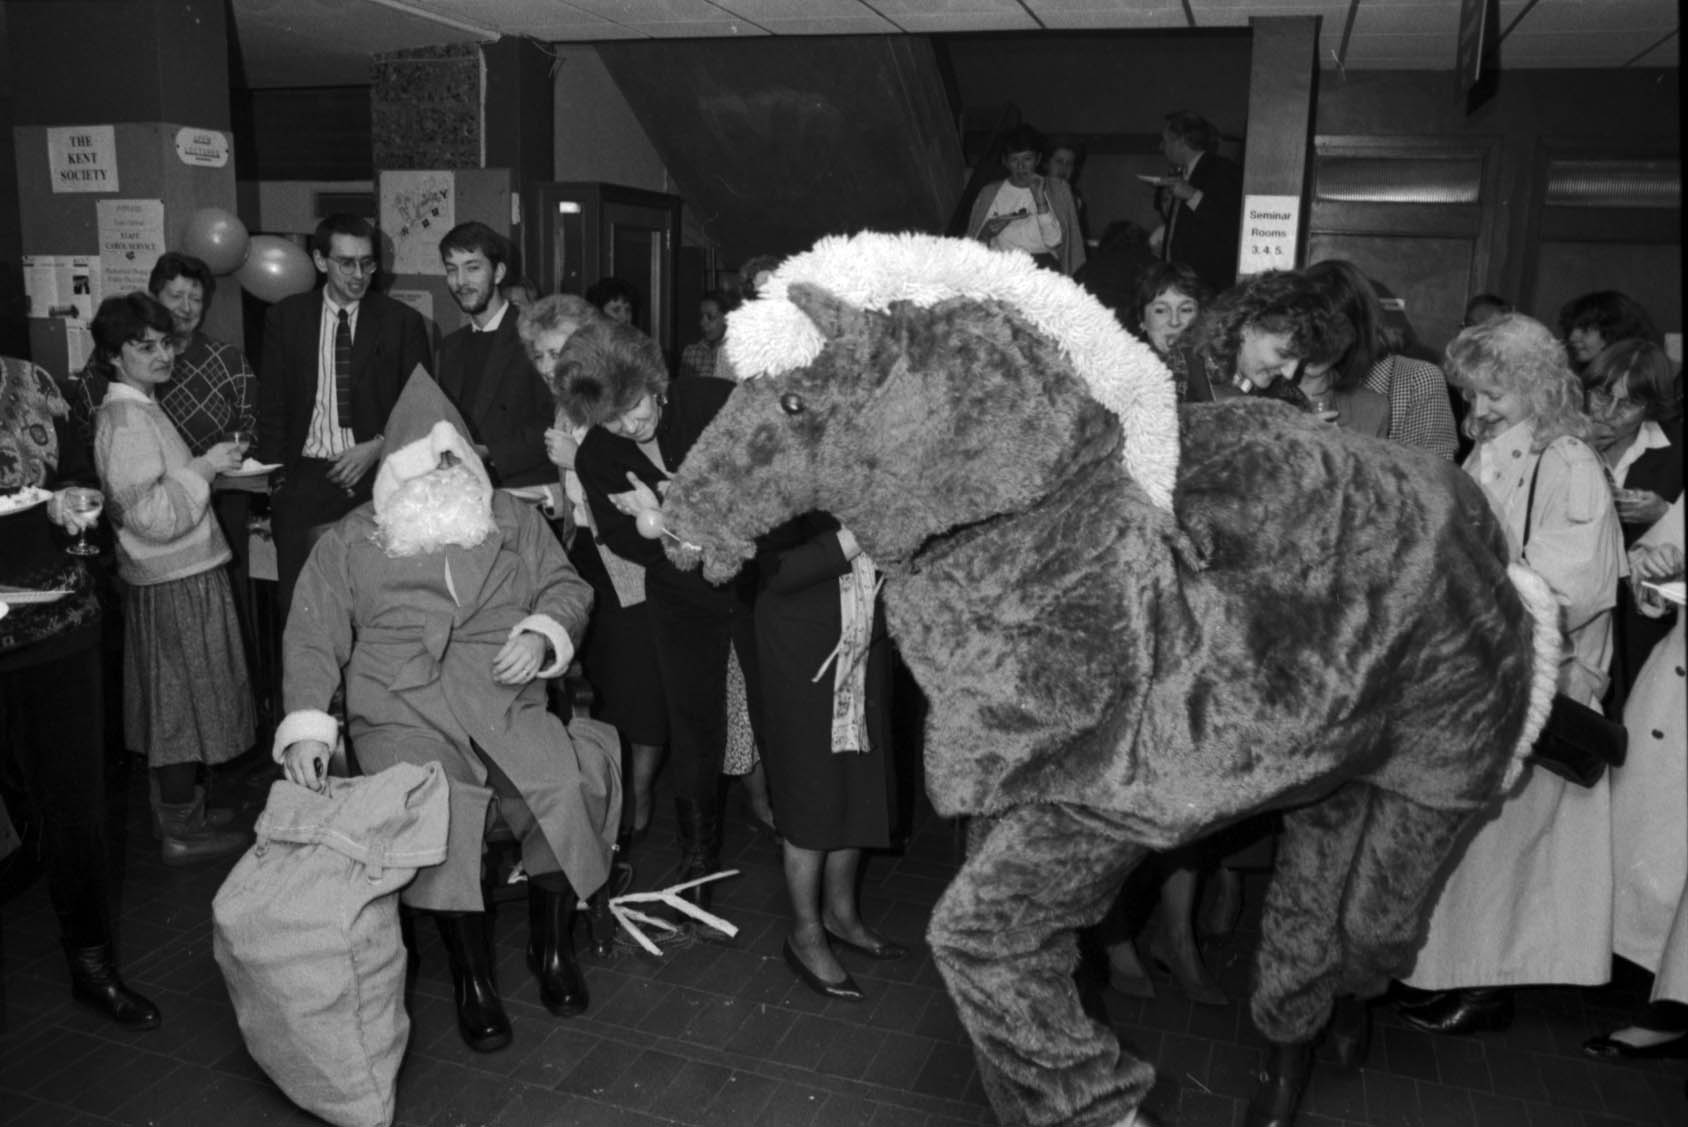 Black and white photograph showing a party in the Registry Office, 1990, complete with Santa and a pantomime horse. [University of Kent Archive, 1471.2]